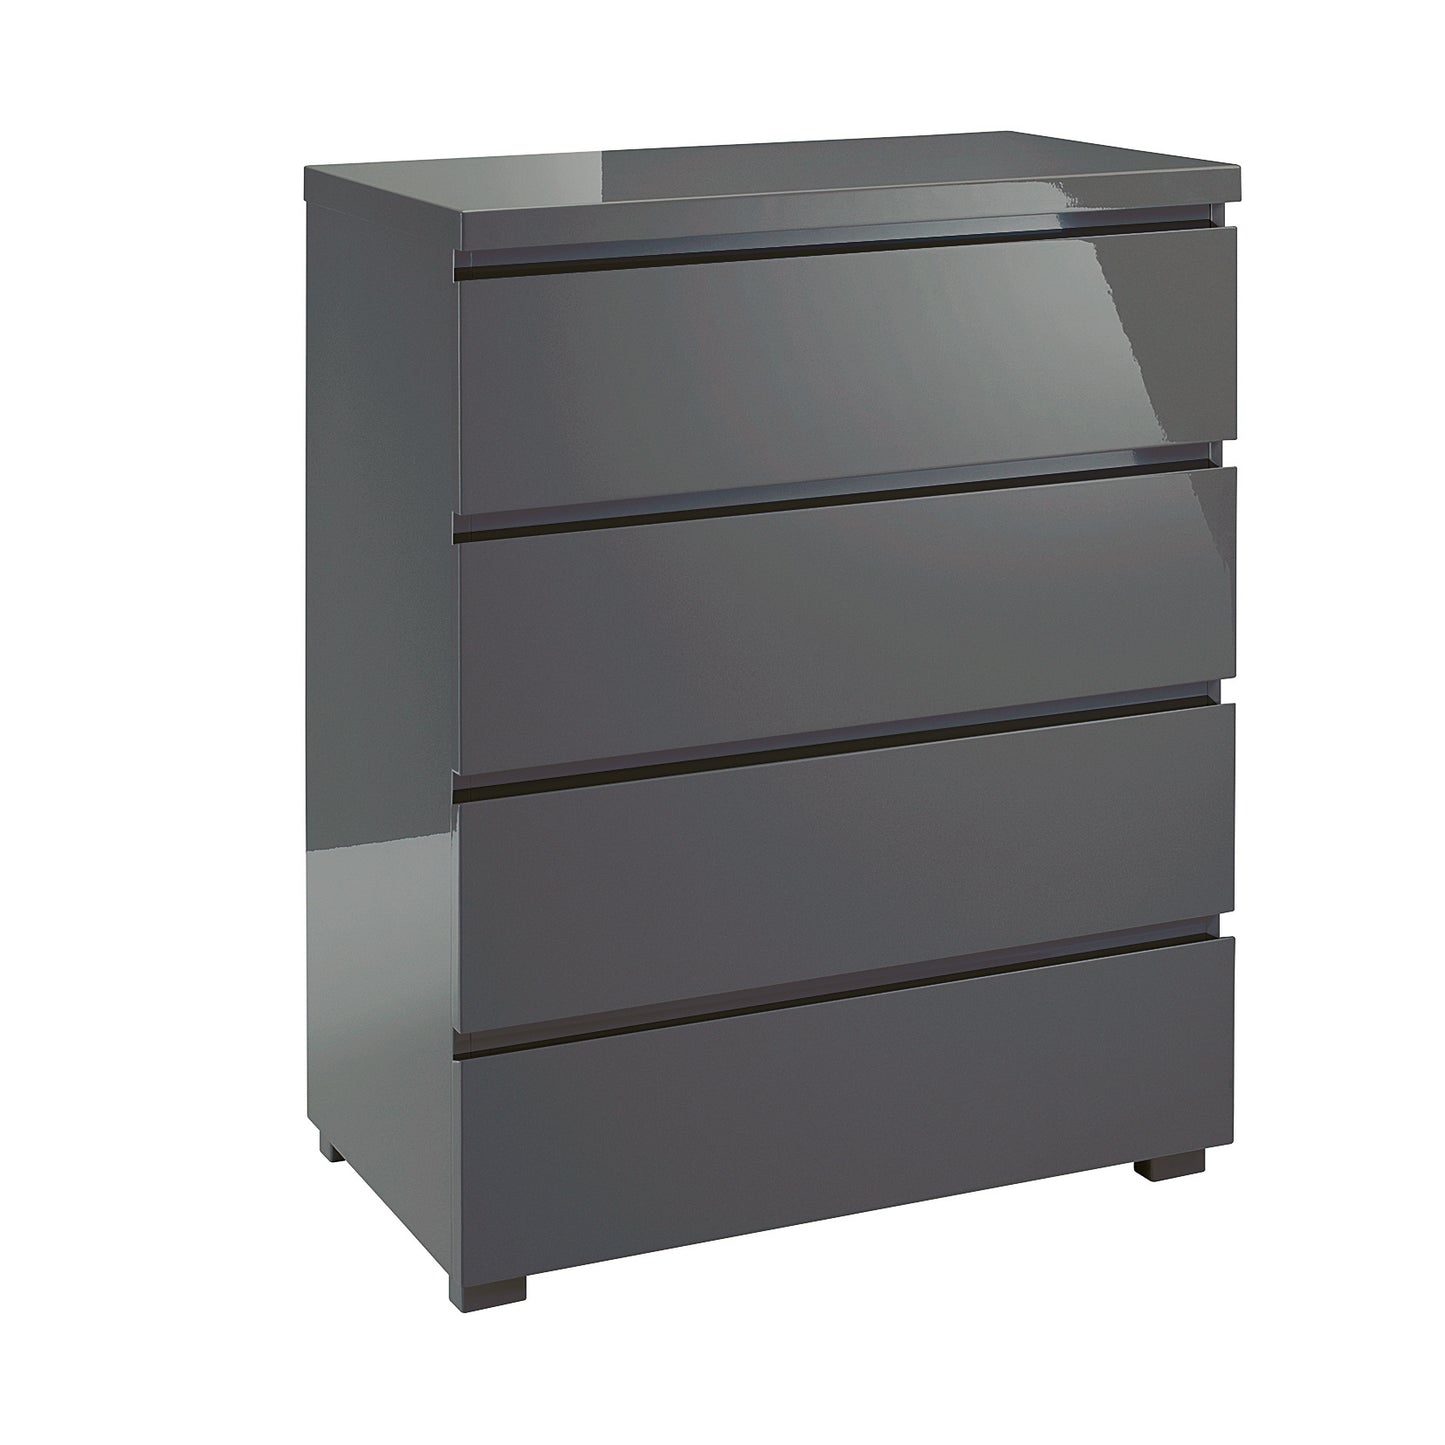 Puro Bedroom Furniture in Charcoal Gloss